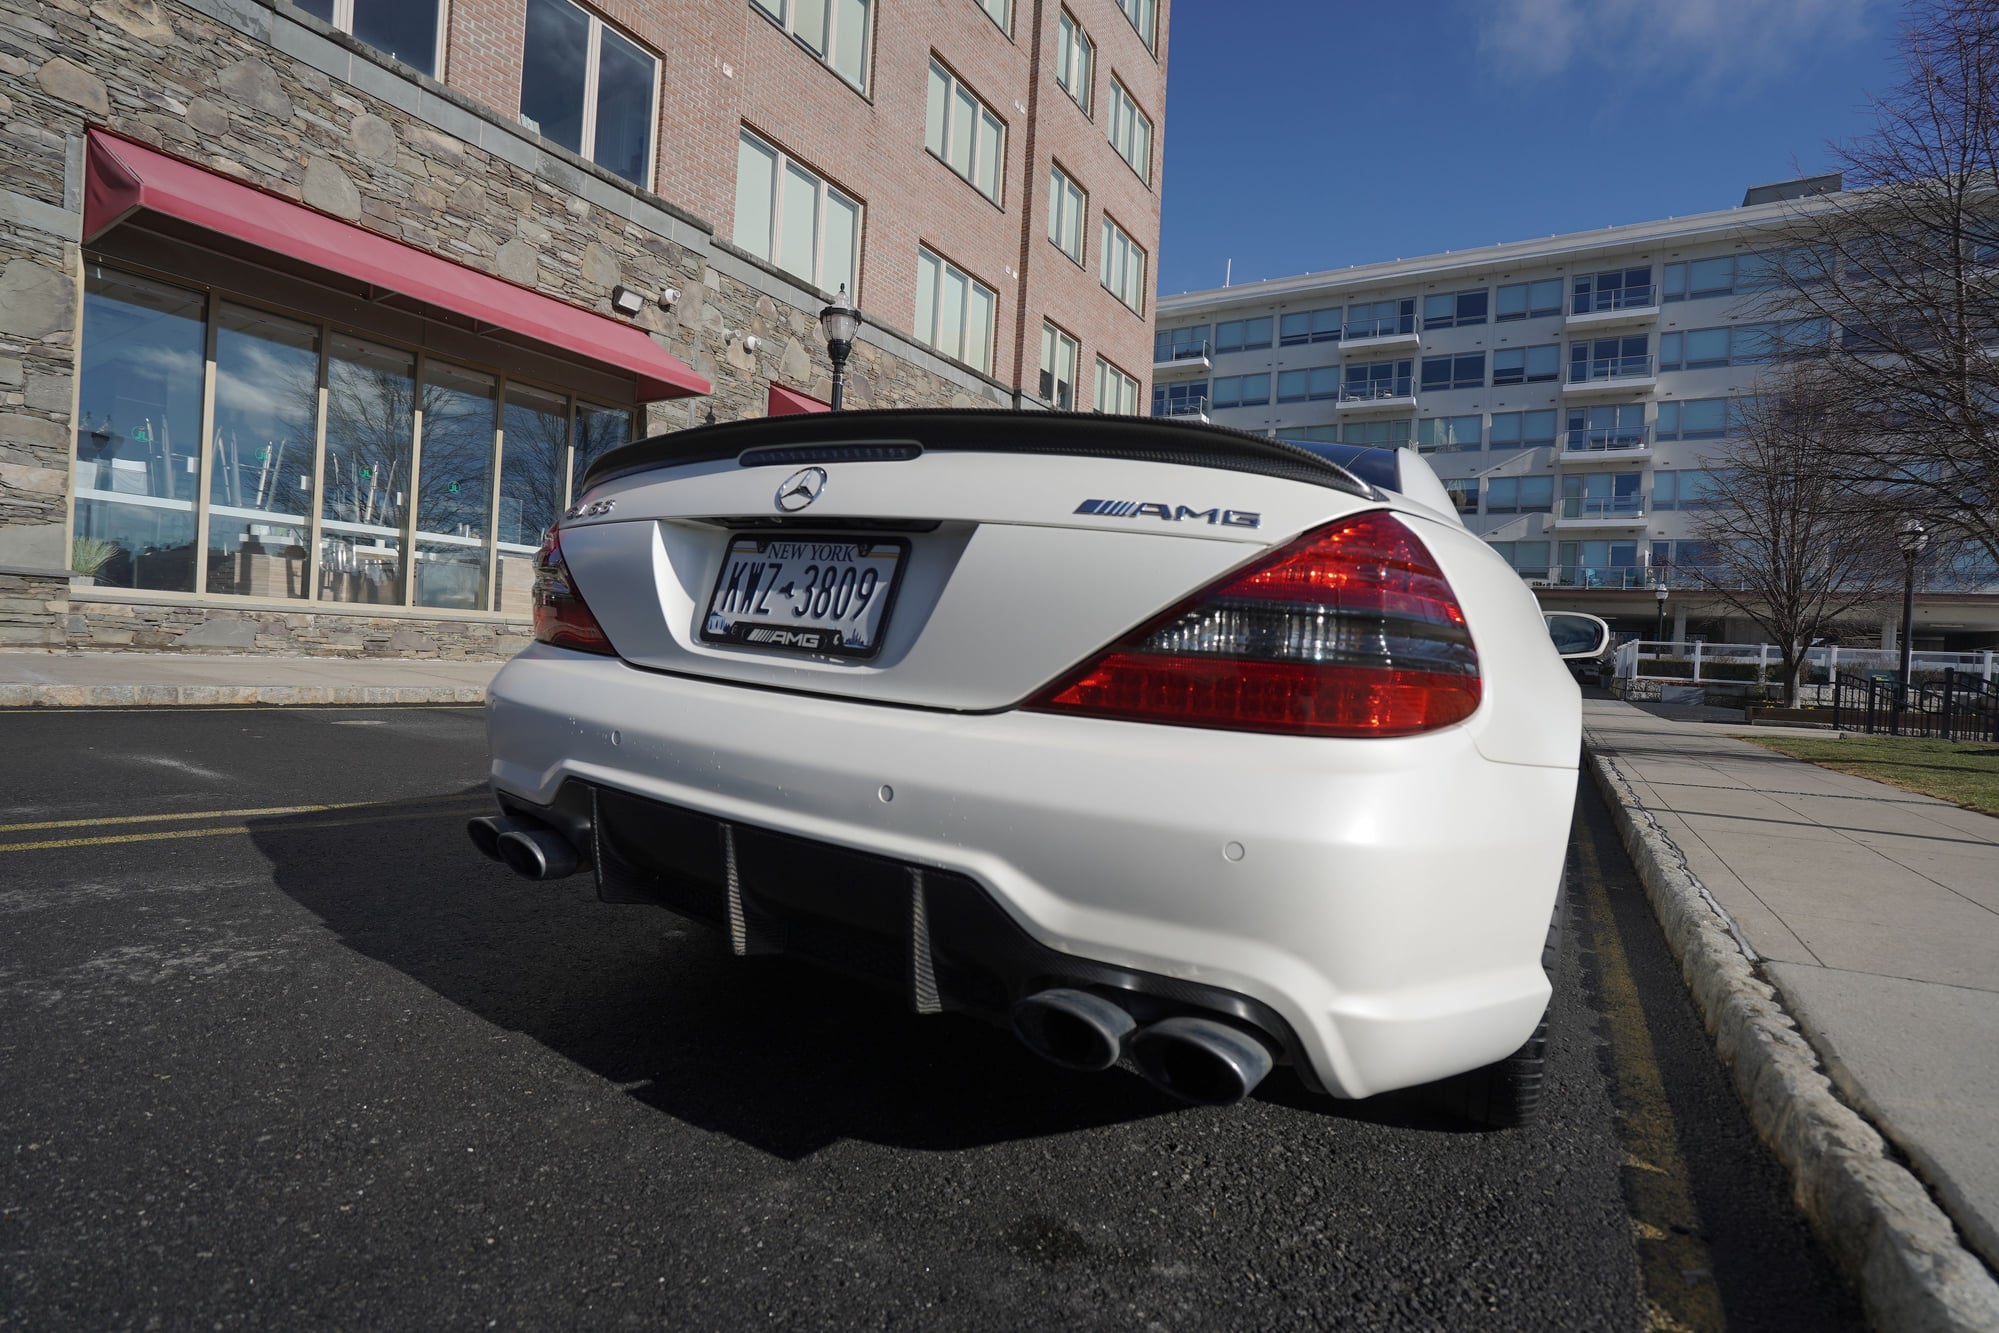 2009 Mercedes-Benz SL63 AMG - 2009 SL63 IWC Edition - Excellent Condition - 49k Miles - Used - VIN WDBSK70F99F156451 - 8 cyl - 2WD - Automatic - Convertible - White - Edgewater, NJ 07047, United States